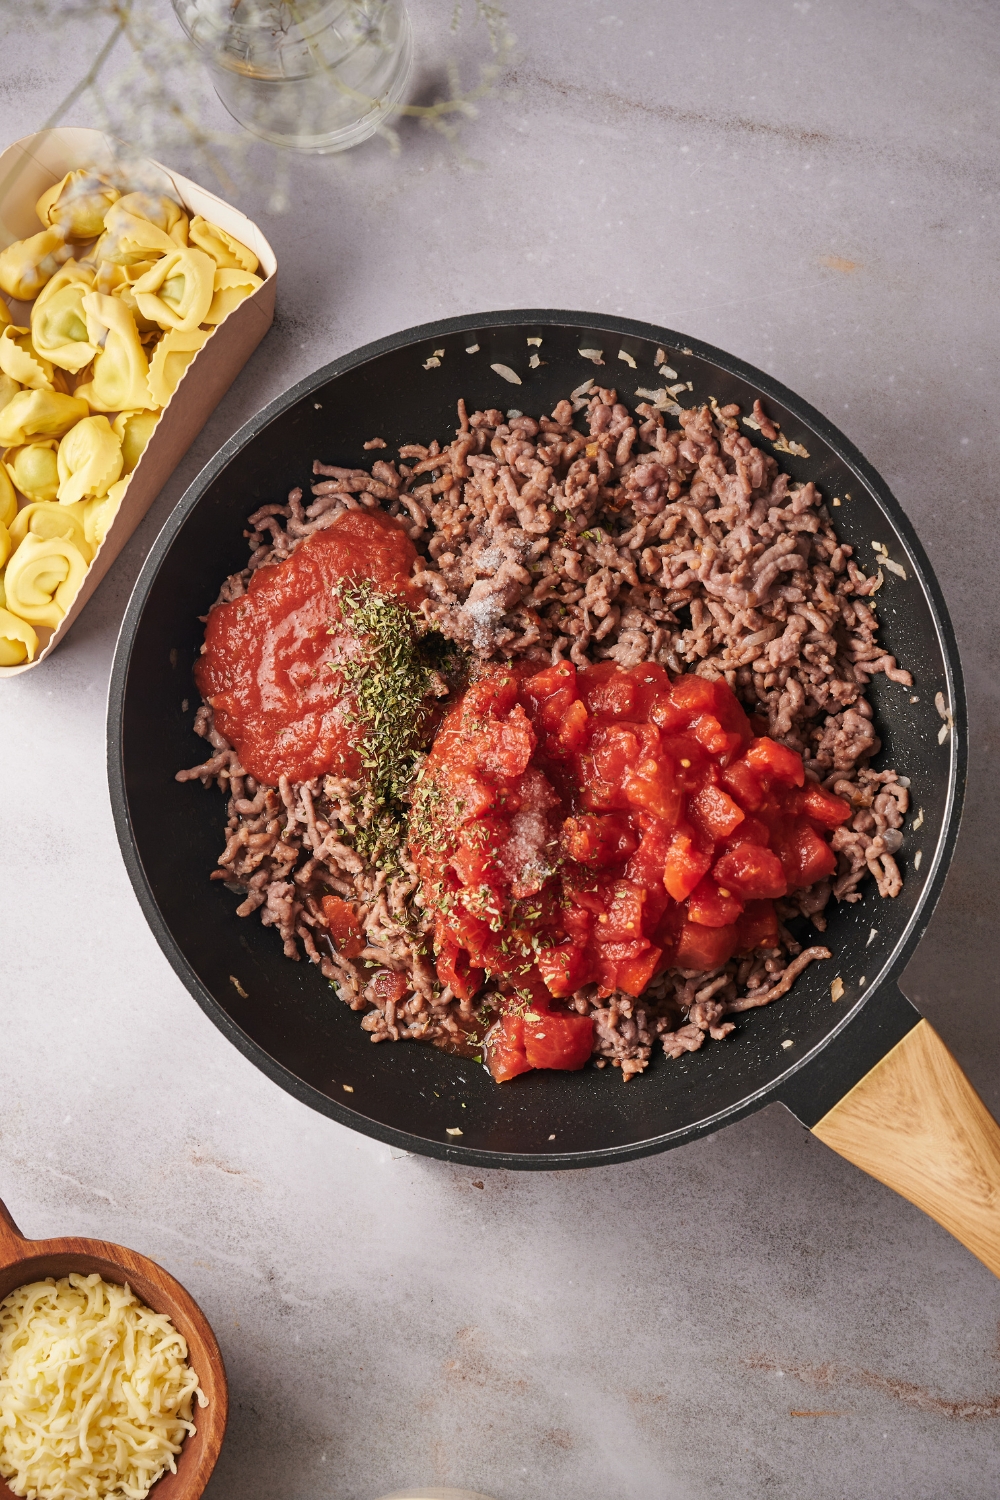 A skillet filled with cooked ground beef, seasonings, tomato sauce, and crushed tomatoes.